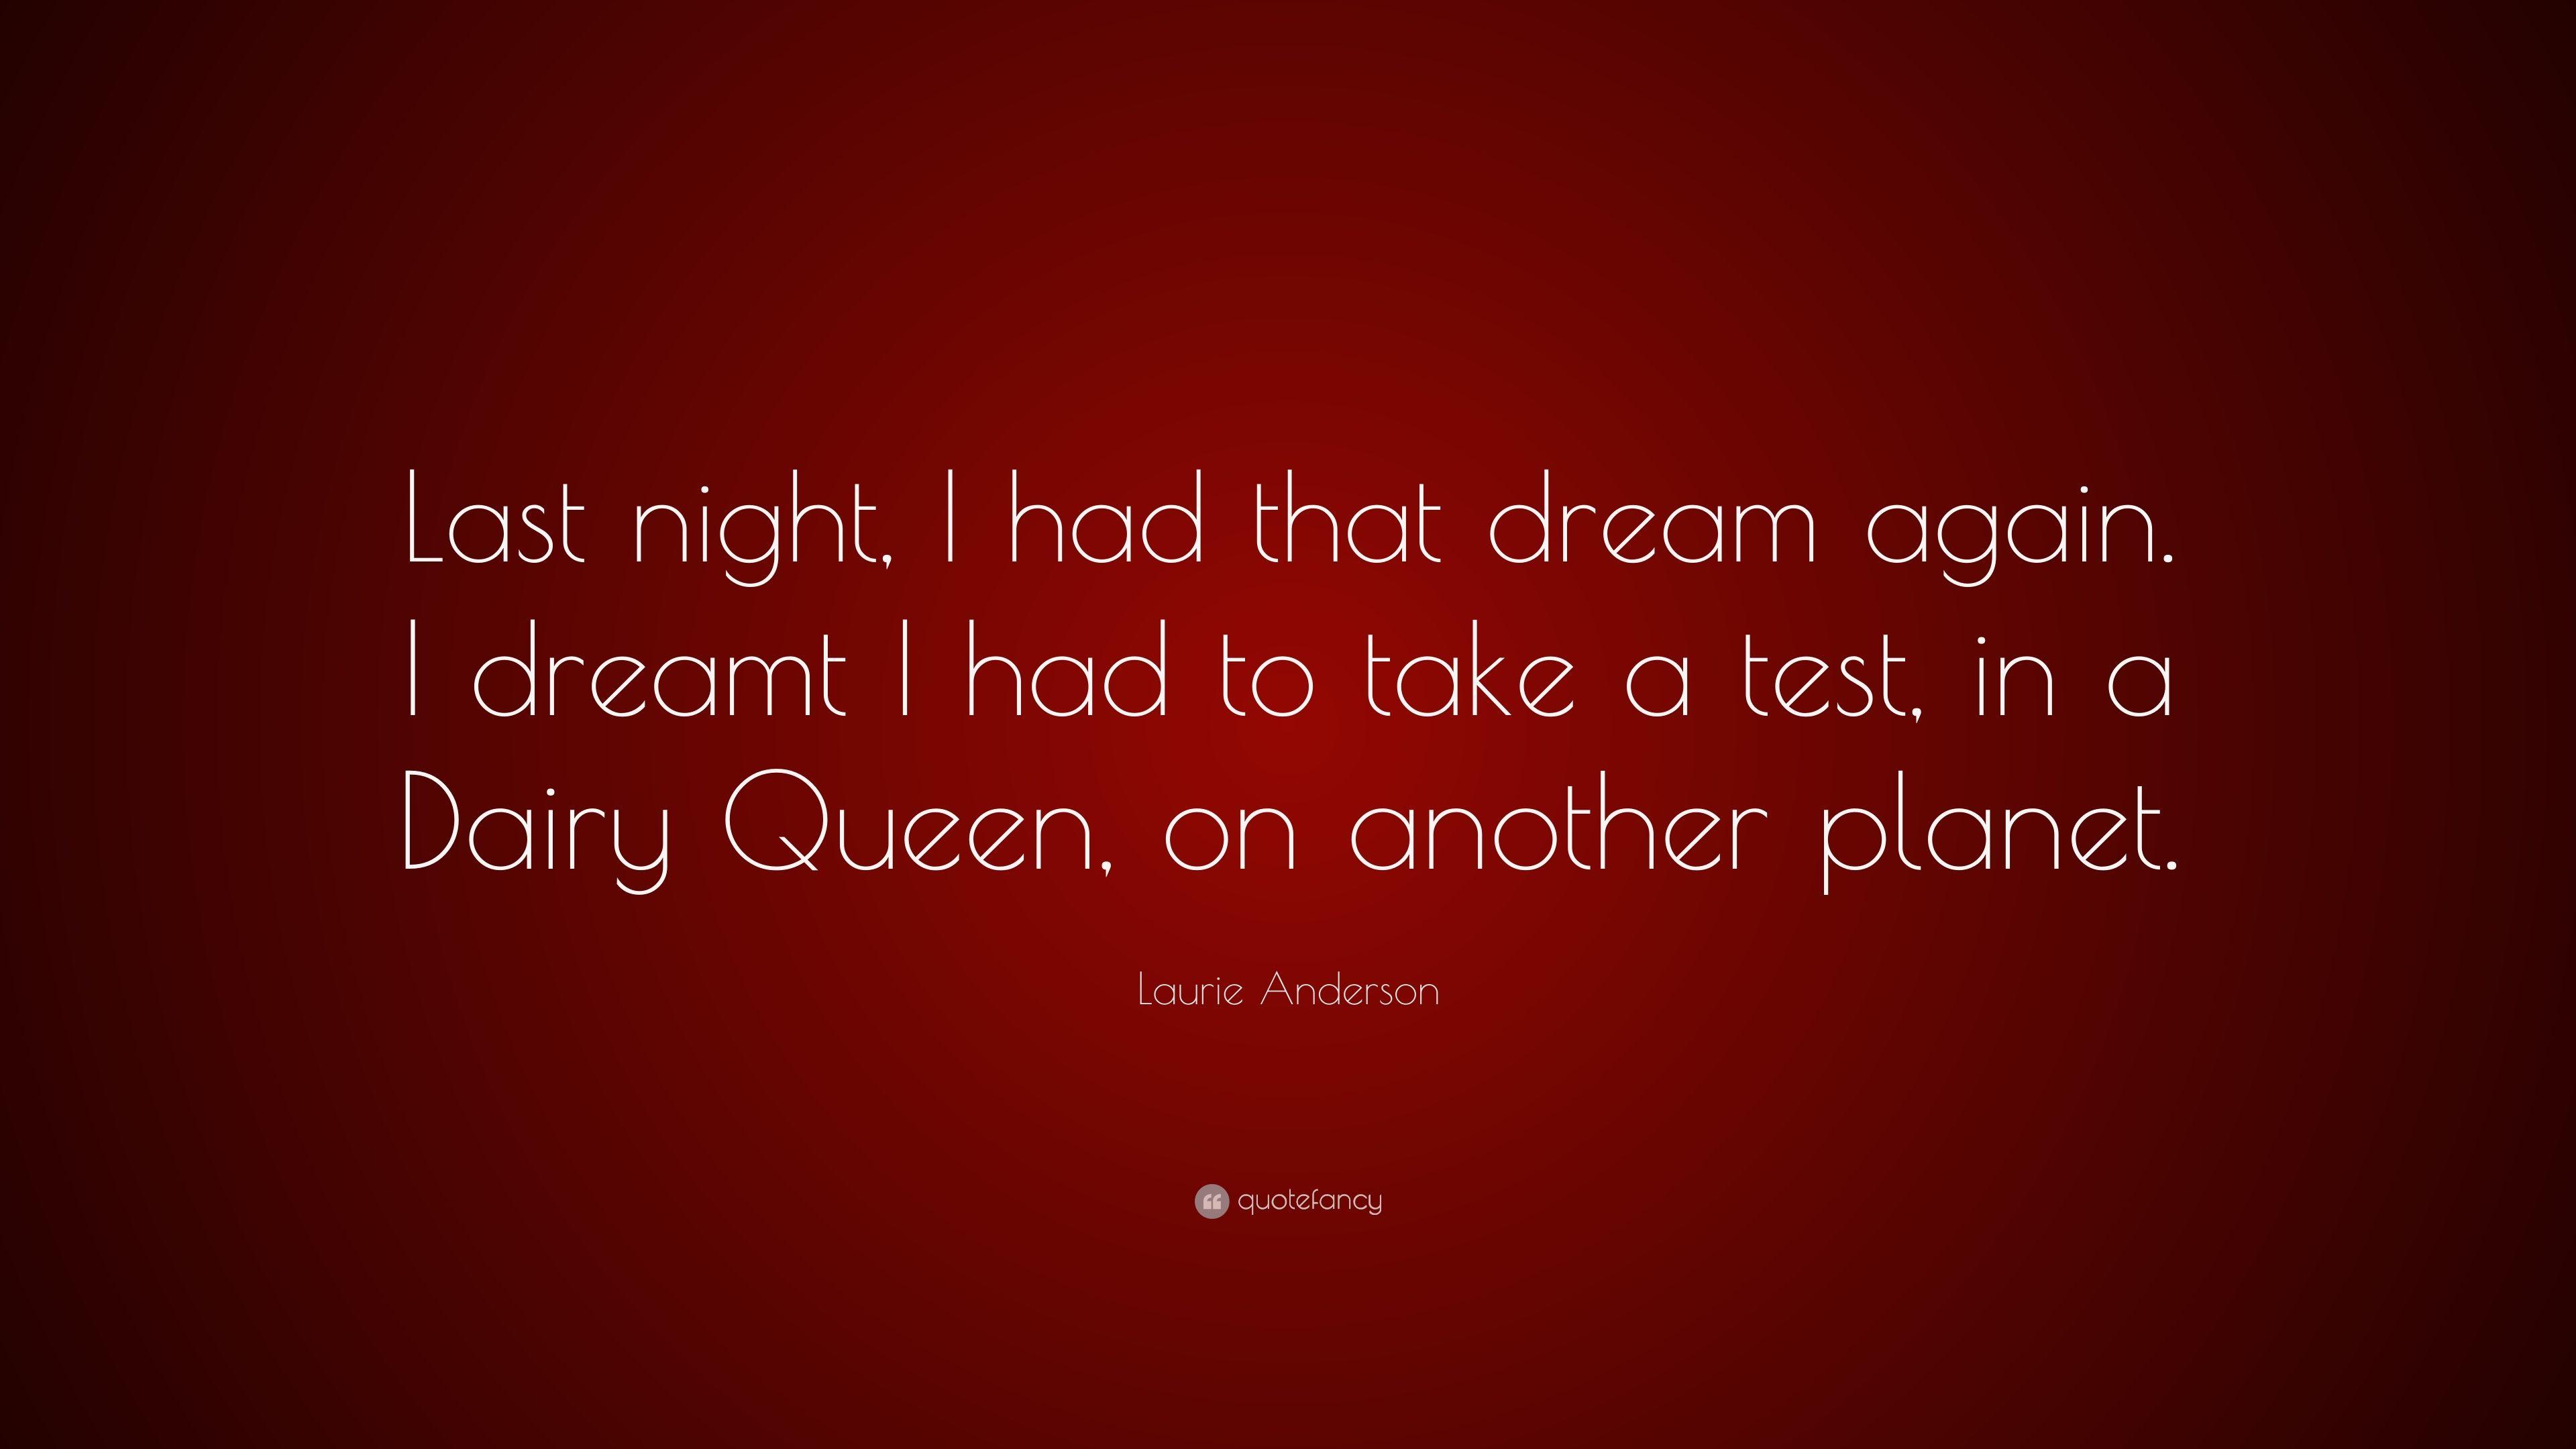 Laurie Anderson Quote: “Last night, I had that dream again. I